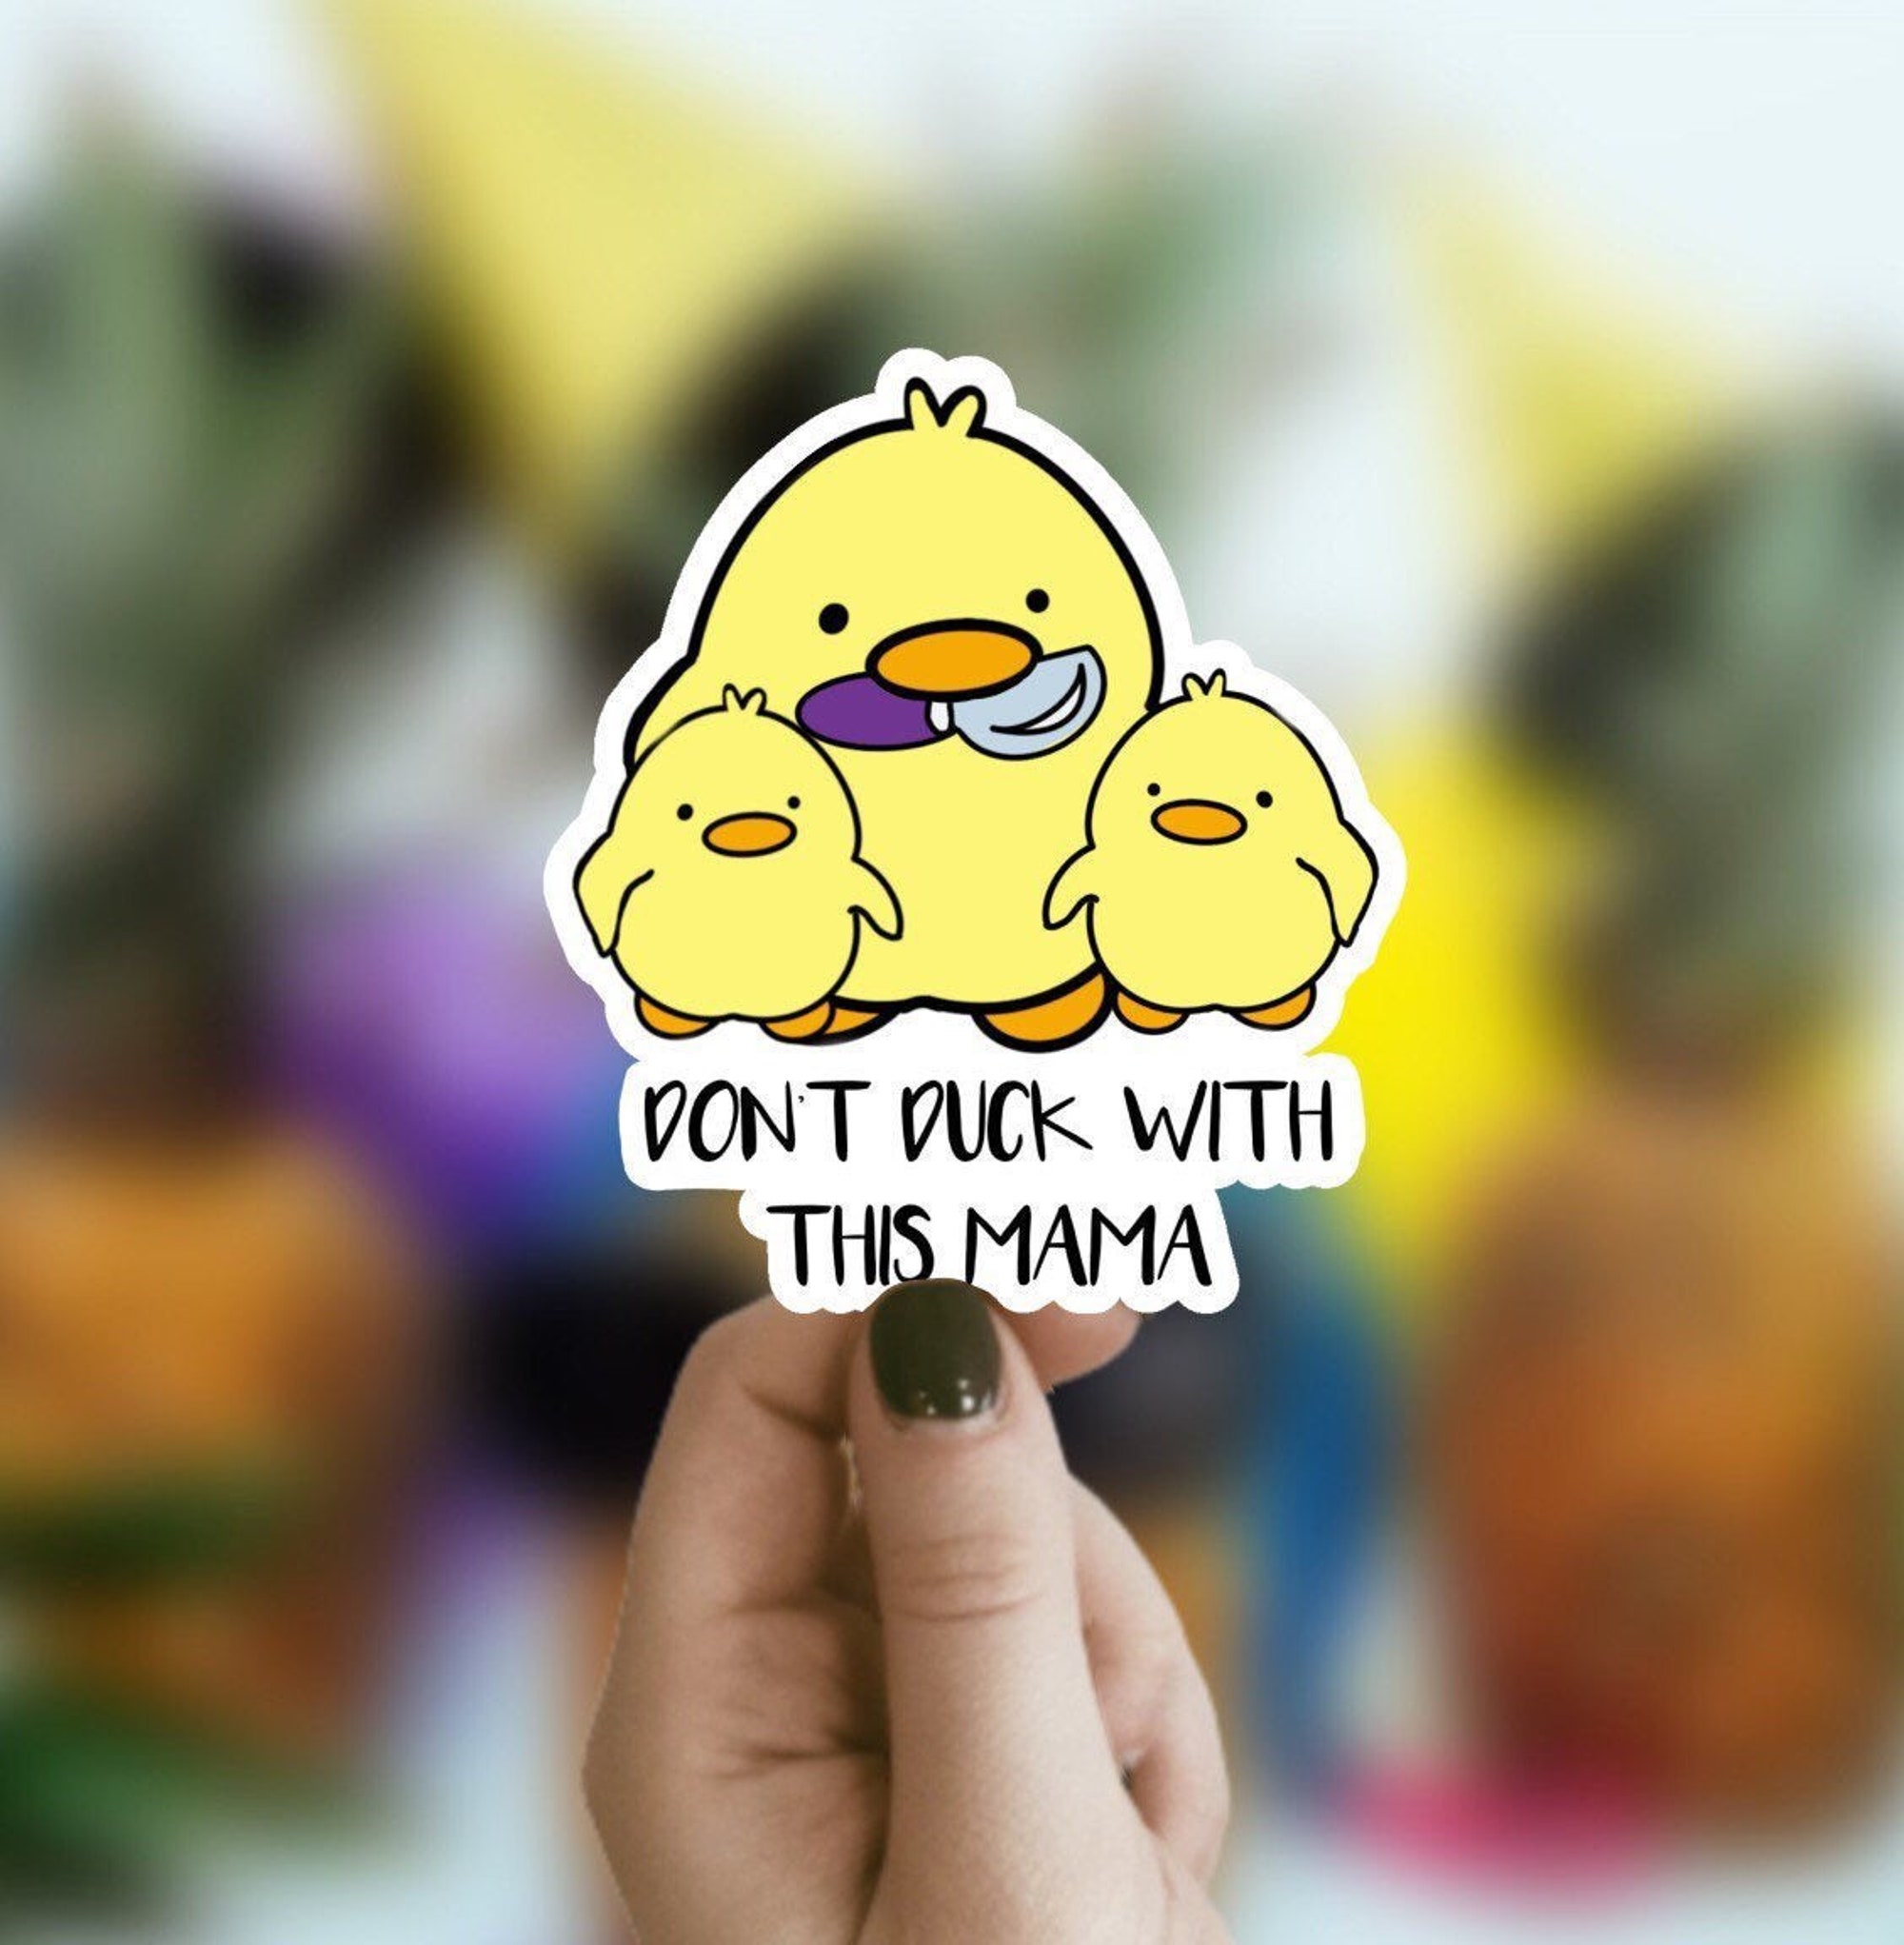 Discover Funny Duck Mama Sticker, Waterproof Sticker, Cute Duck Sticker, Laptop Sticker